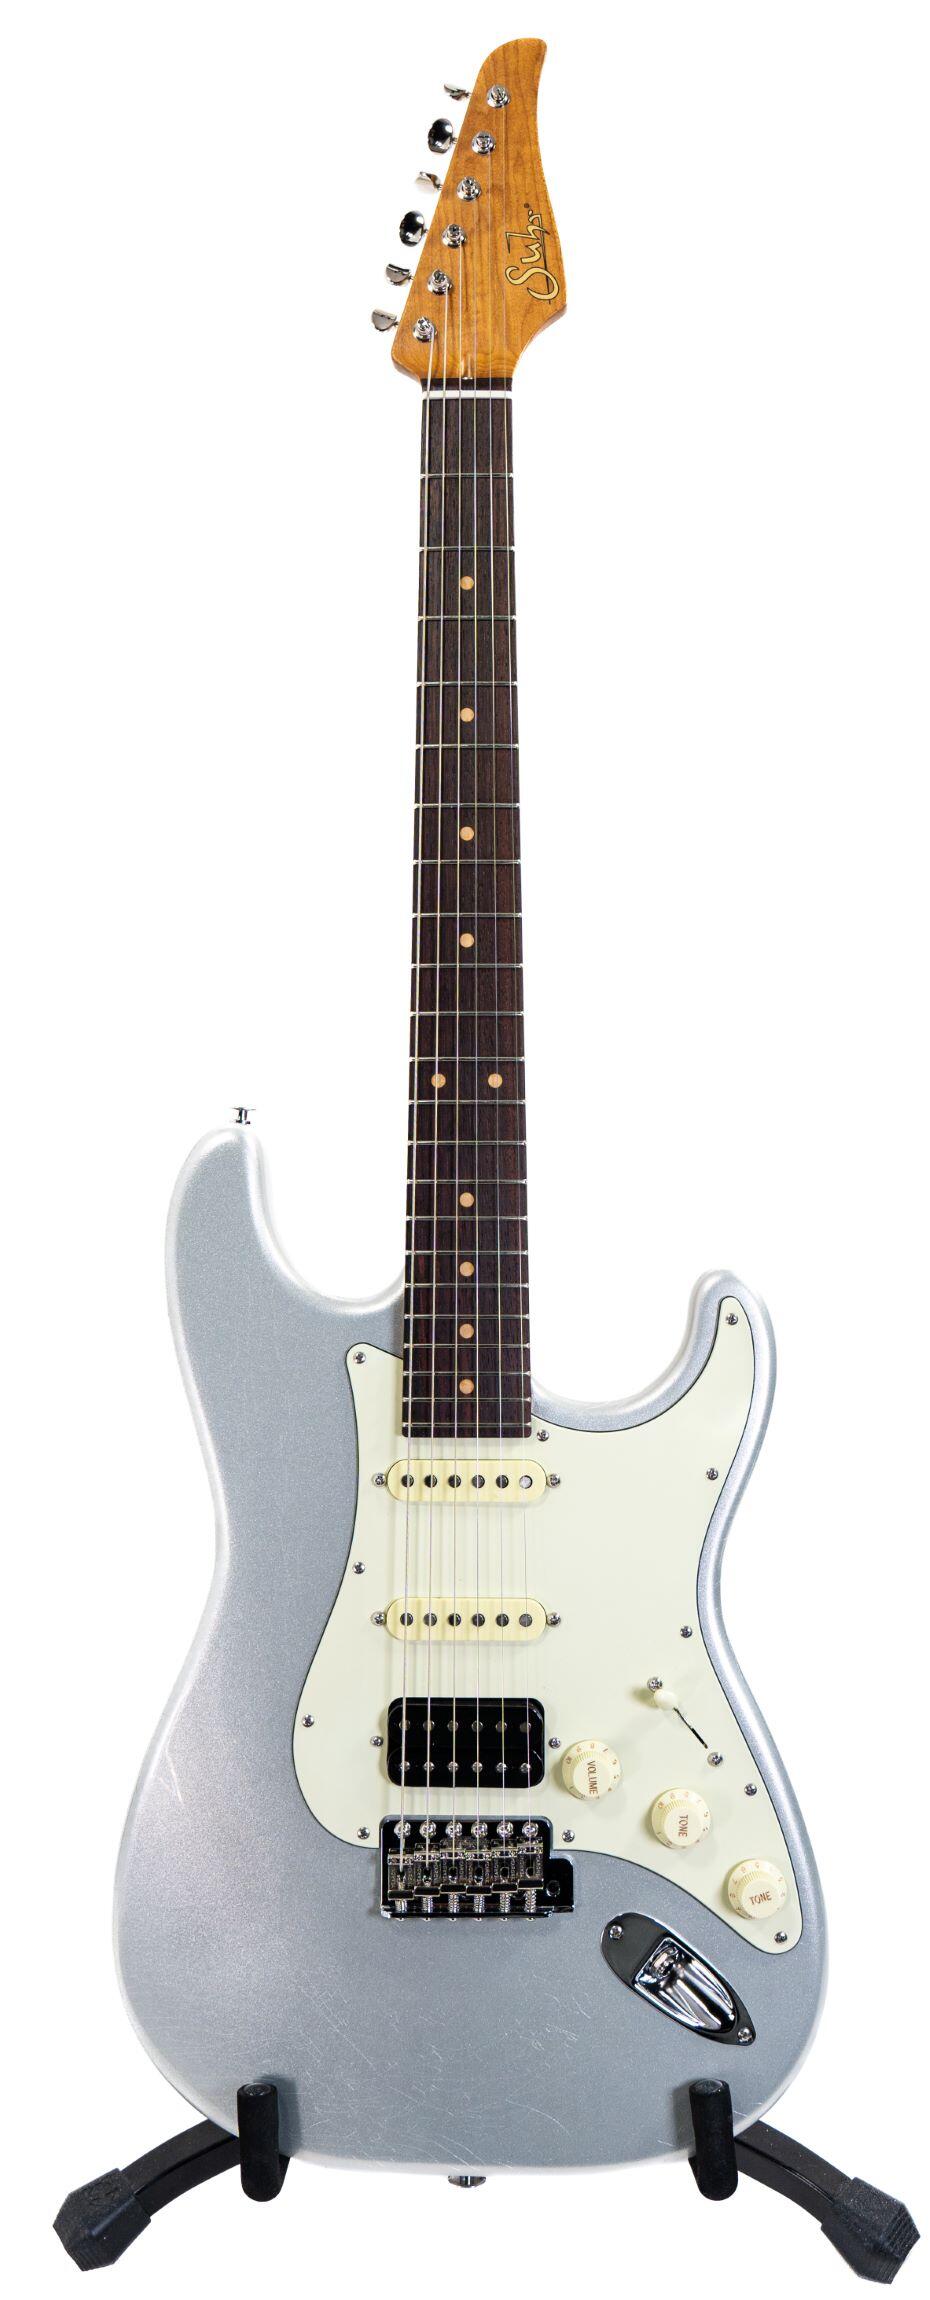 Suhr Guitars CLASSIC S Vintage Limited Edition, Firemist Silver : photo 1